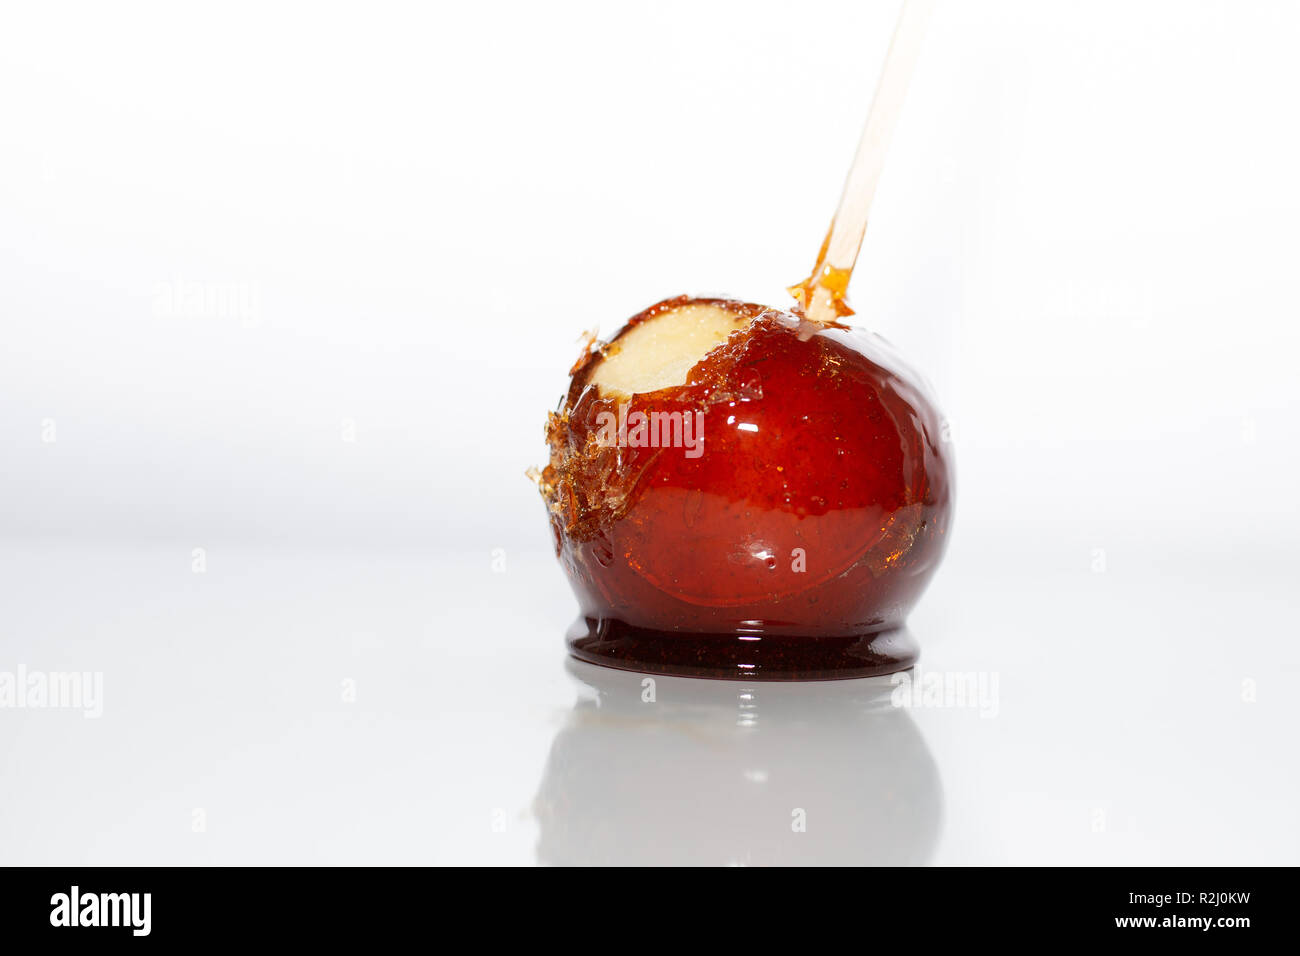 A candy apple with a bitten taken out of it, with white backround. Stock Photo